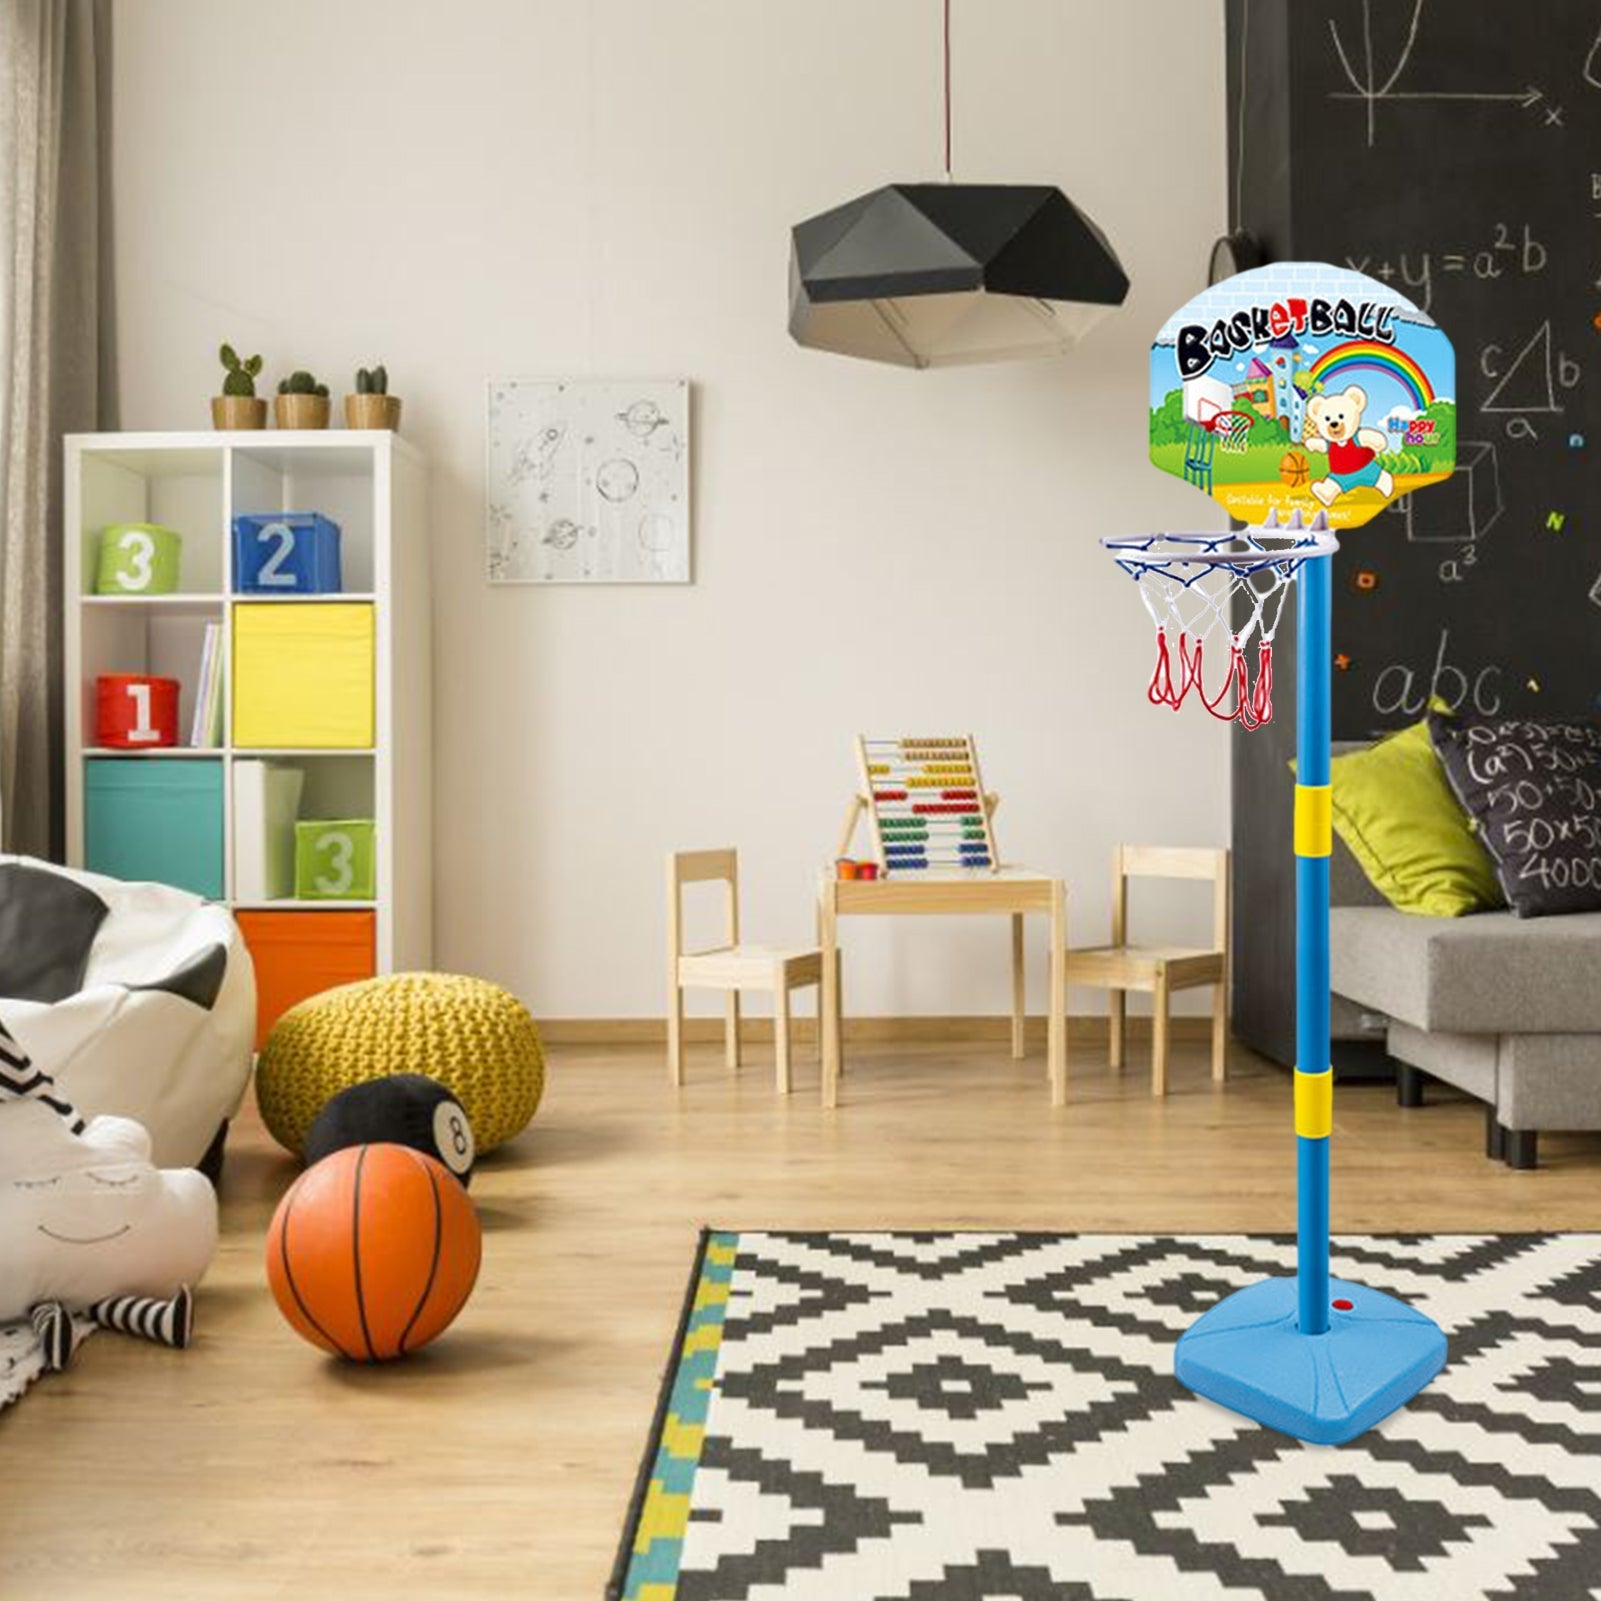 Indoor And Outdoor Liftable Basketball Hoop Sports Toys-Toys & Games-LifeGetsEasy